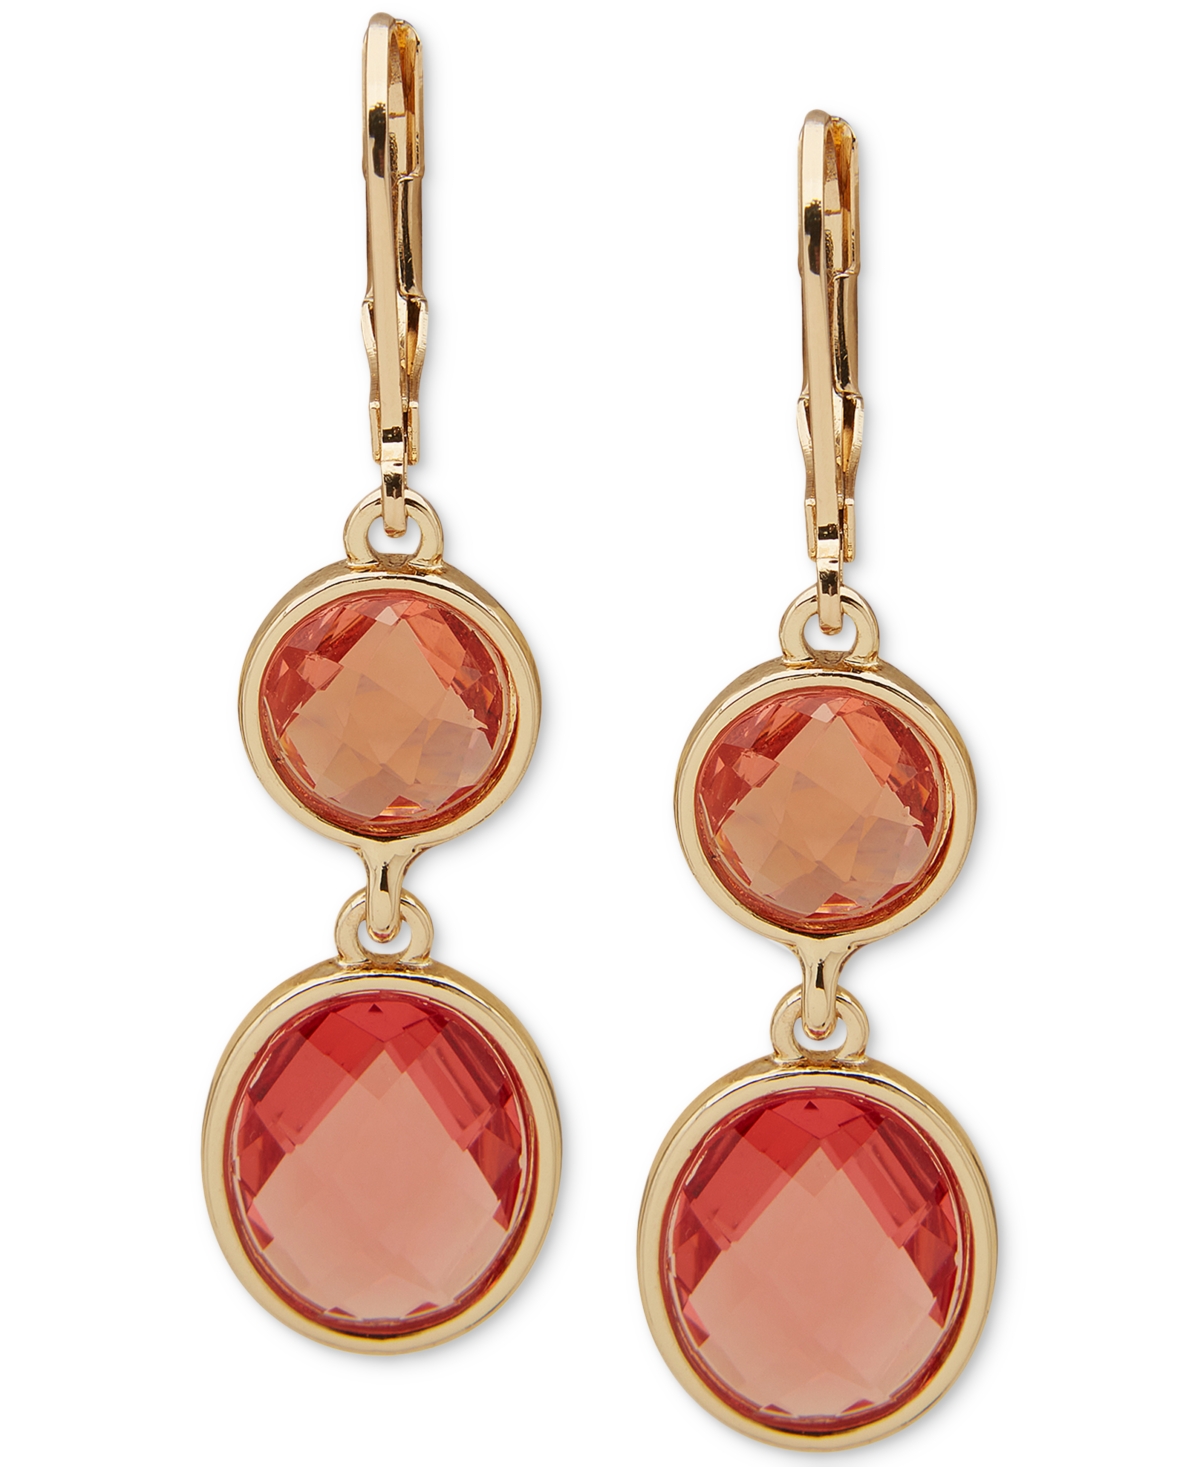 Gold-Tone Color Stone Double Drop Earrings - Pink